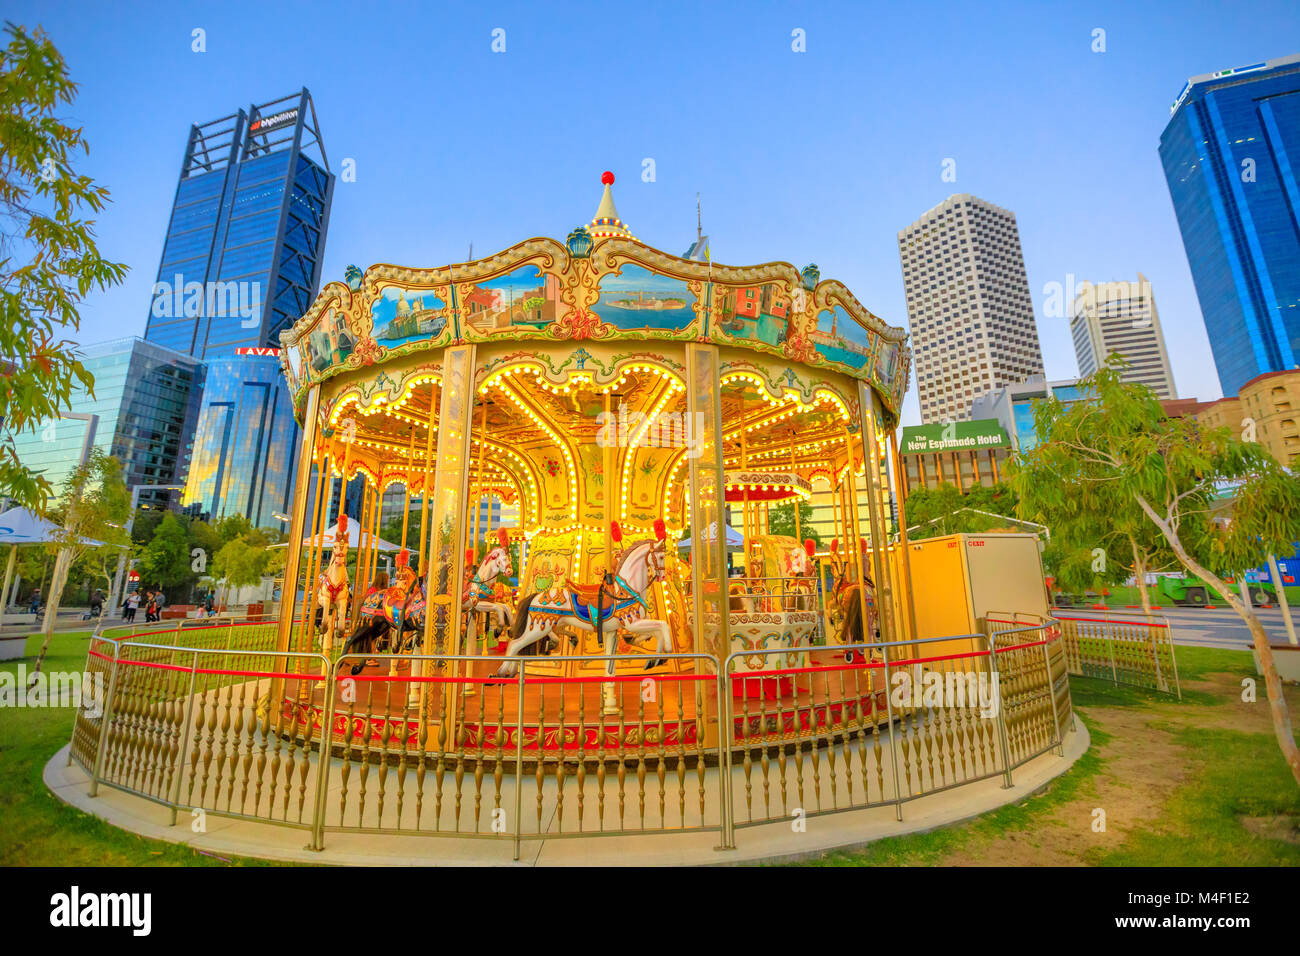 Perth, Australia - Jan 6, 2018: traditional Venetian Carousel at Elizabeth Quay, Perth, WA. Esplanade with modern skyscrapers of Central Business District on background. Blue hour shot. Urban scene. Stock Photo